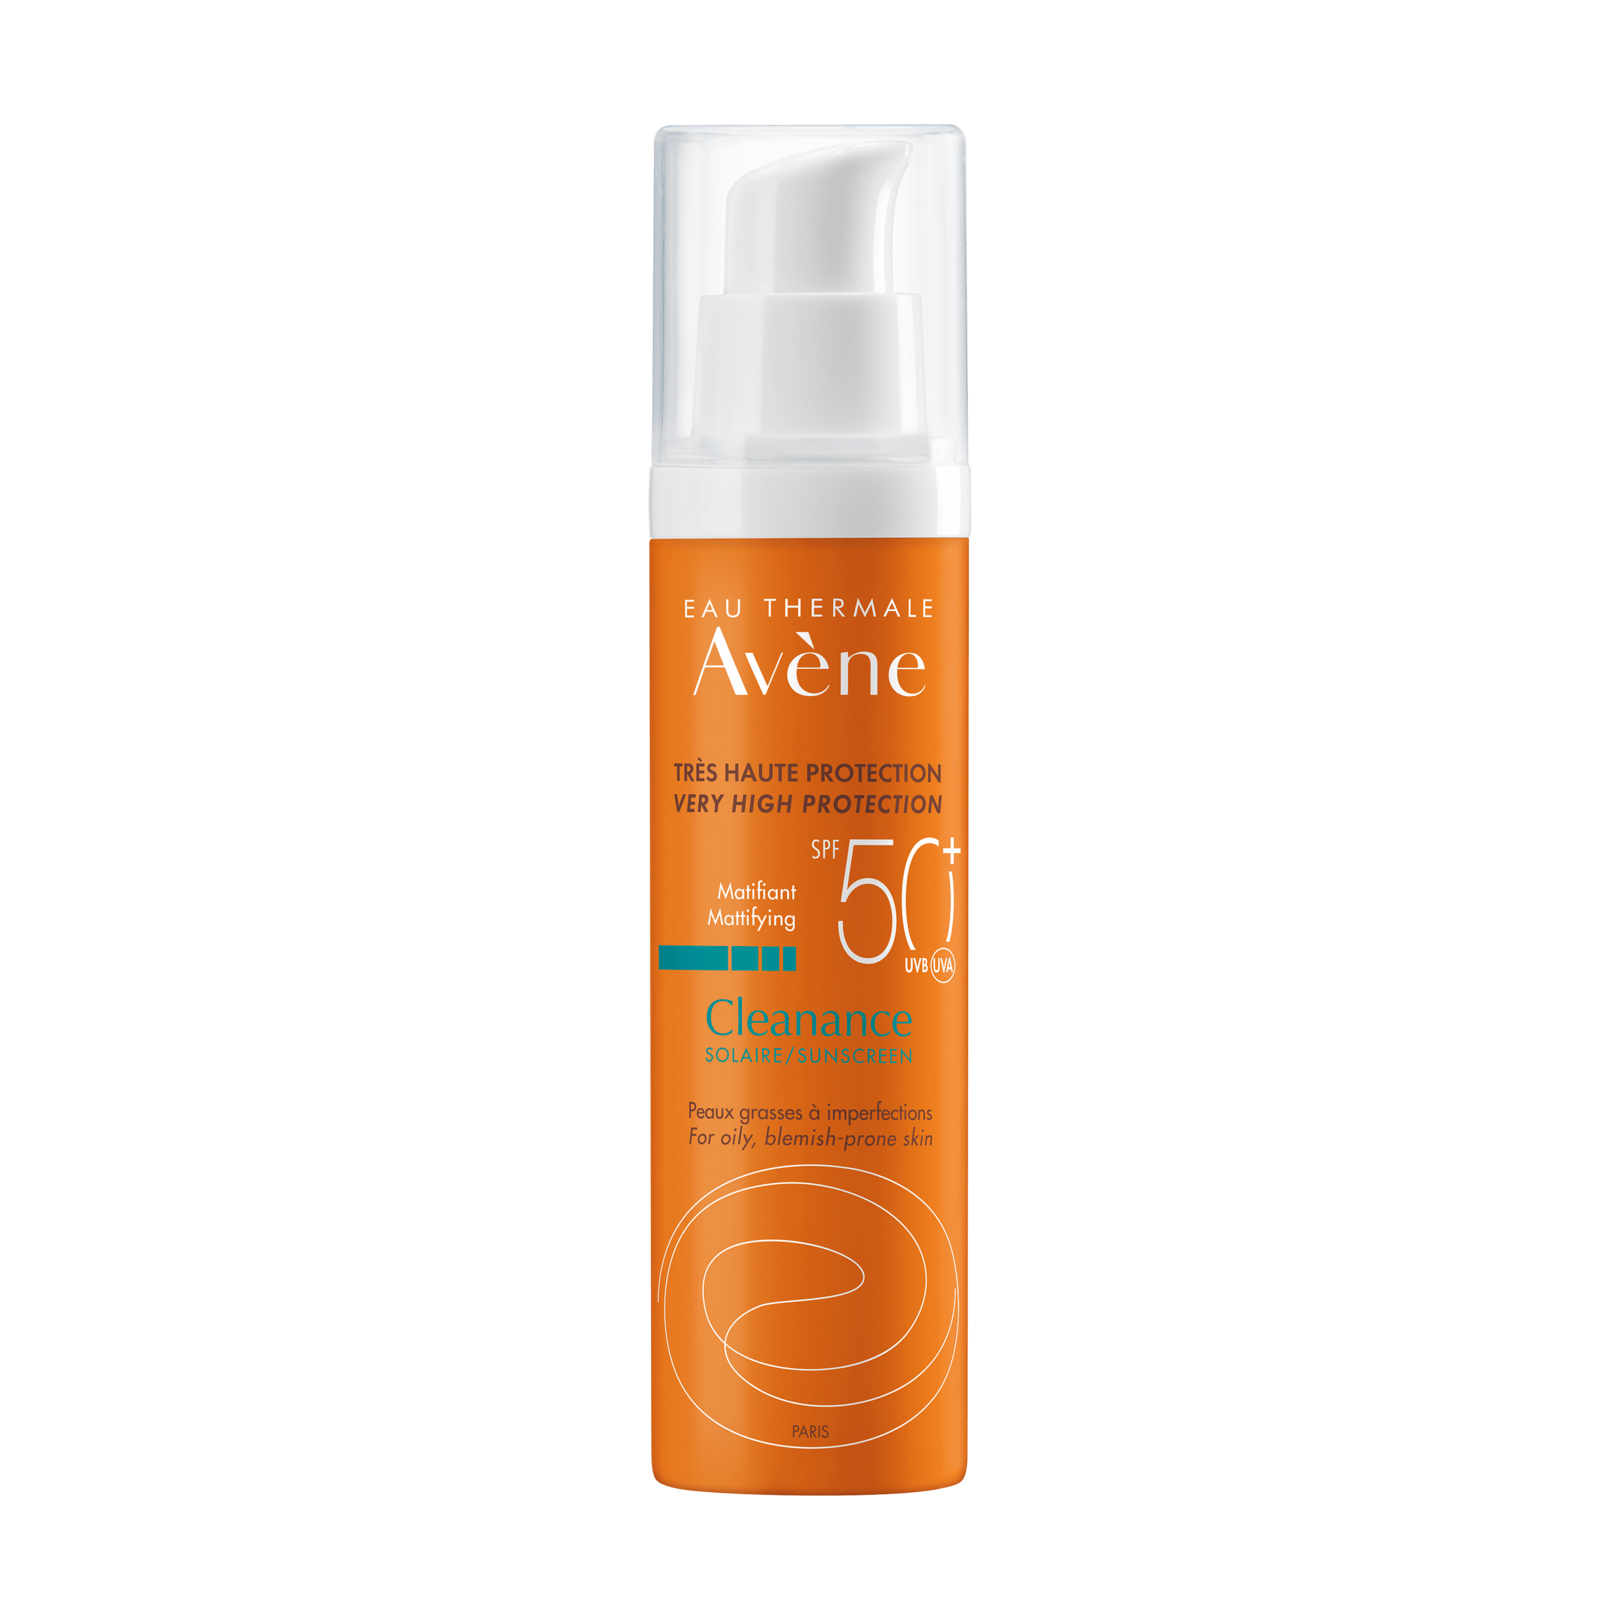 Cleanance solaire spf 50+